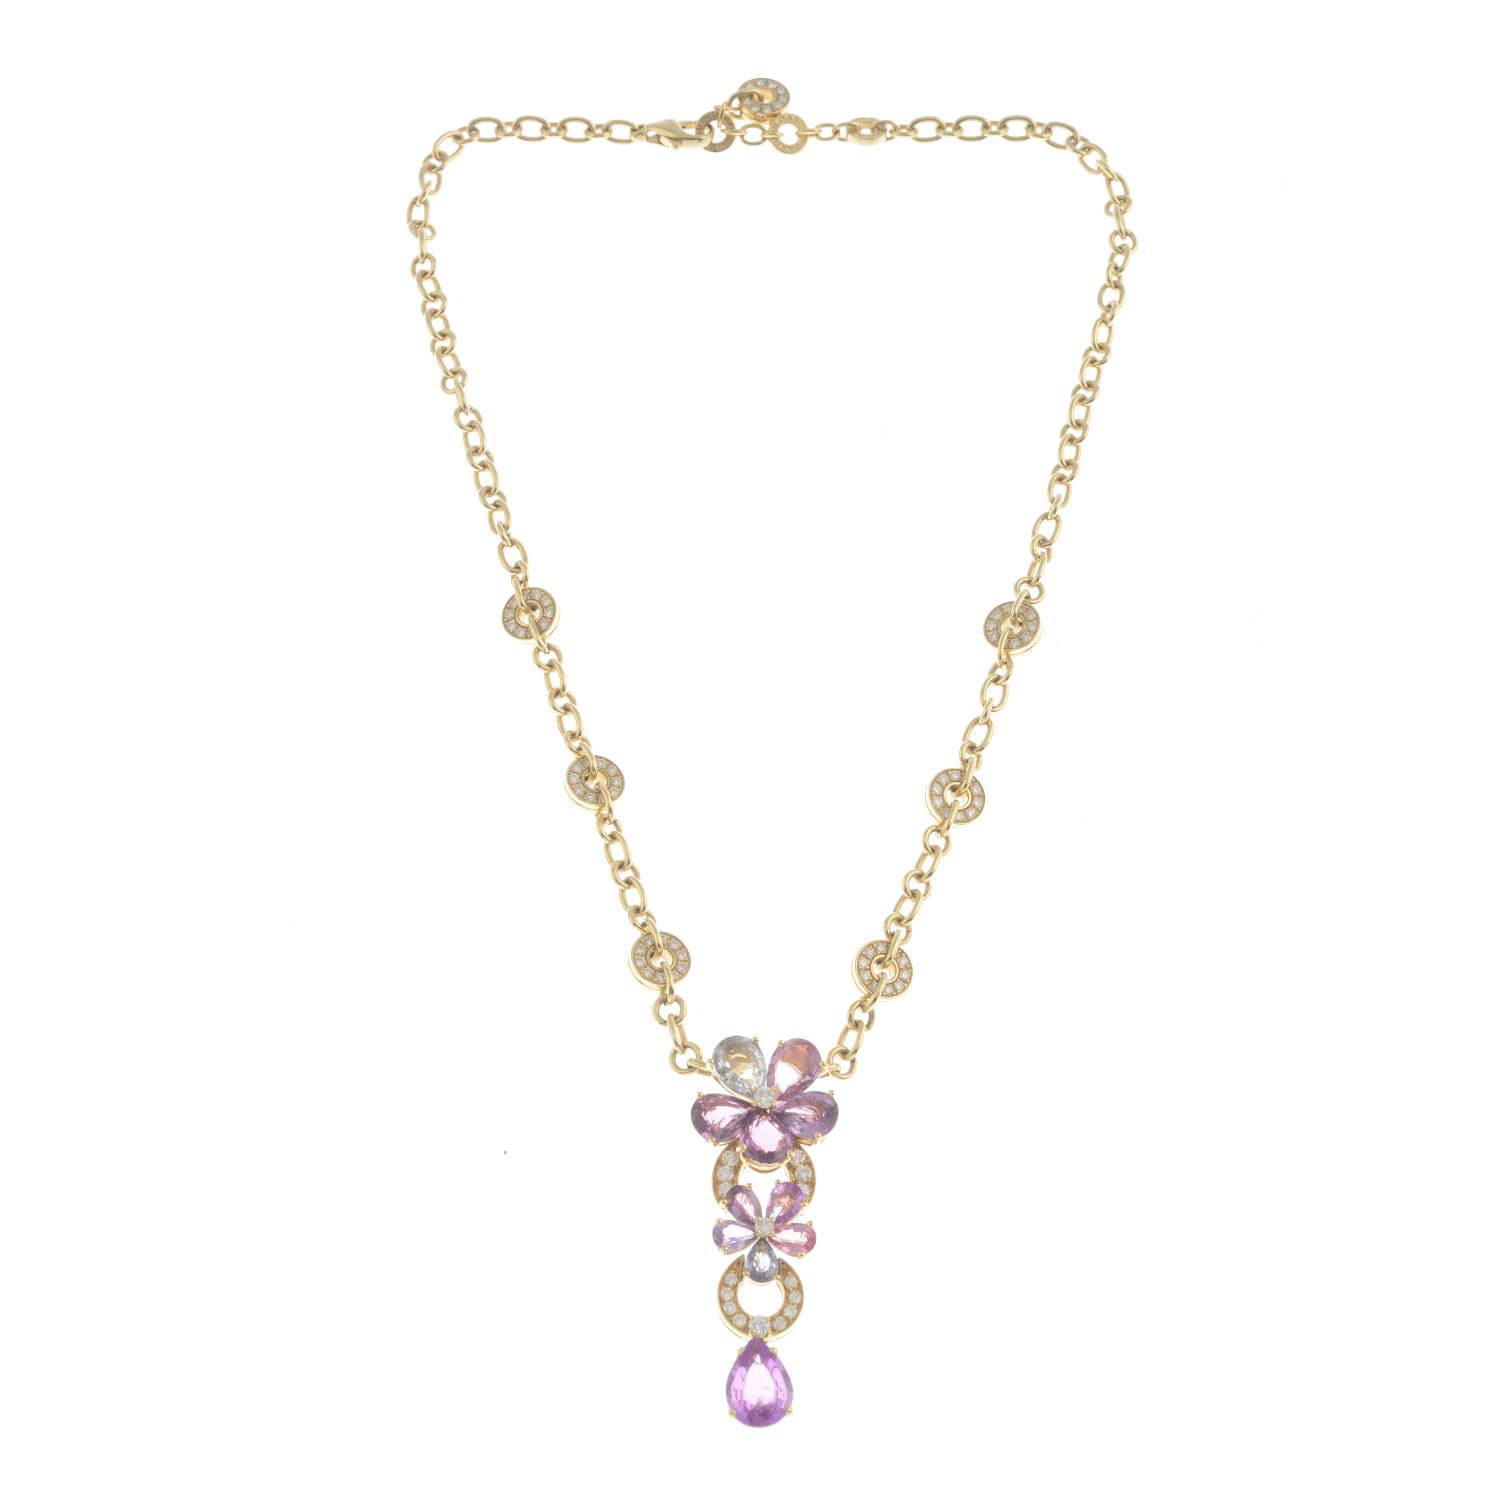 A limited edition diamond and vari-hue 'Sapphire Flower' necklace, - Image 2 of 5